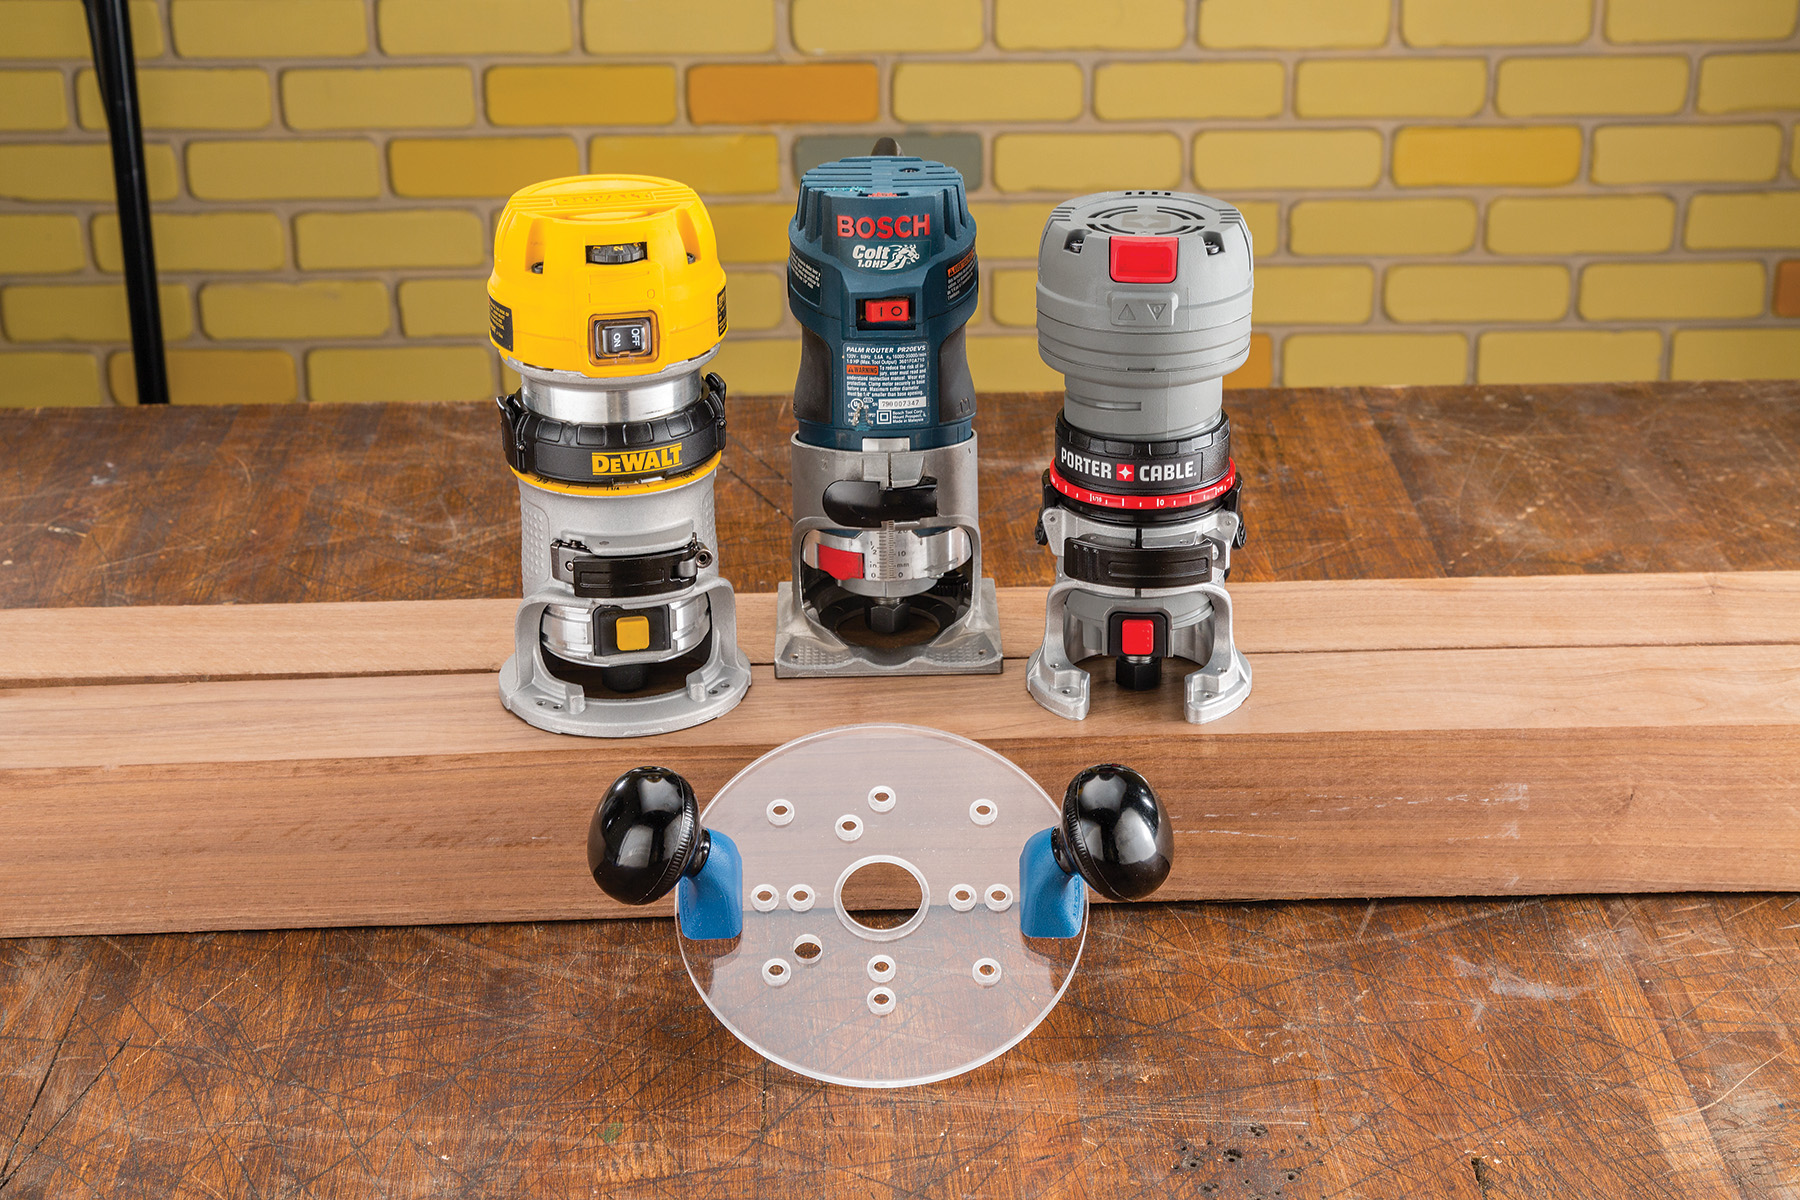 Rockler's Compact Router Sub-base is predrilled for quick mounting to the fixed bases of the most popular Bosch, DeWalt and Porter-Cable compact routers.